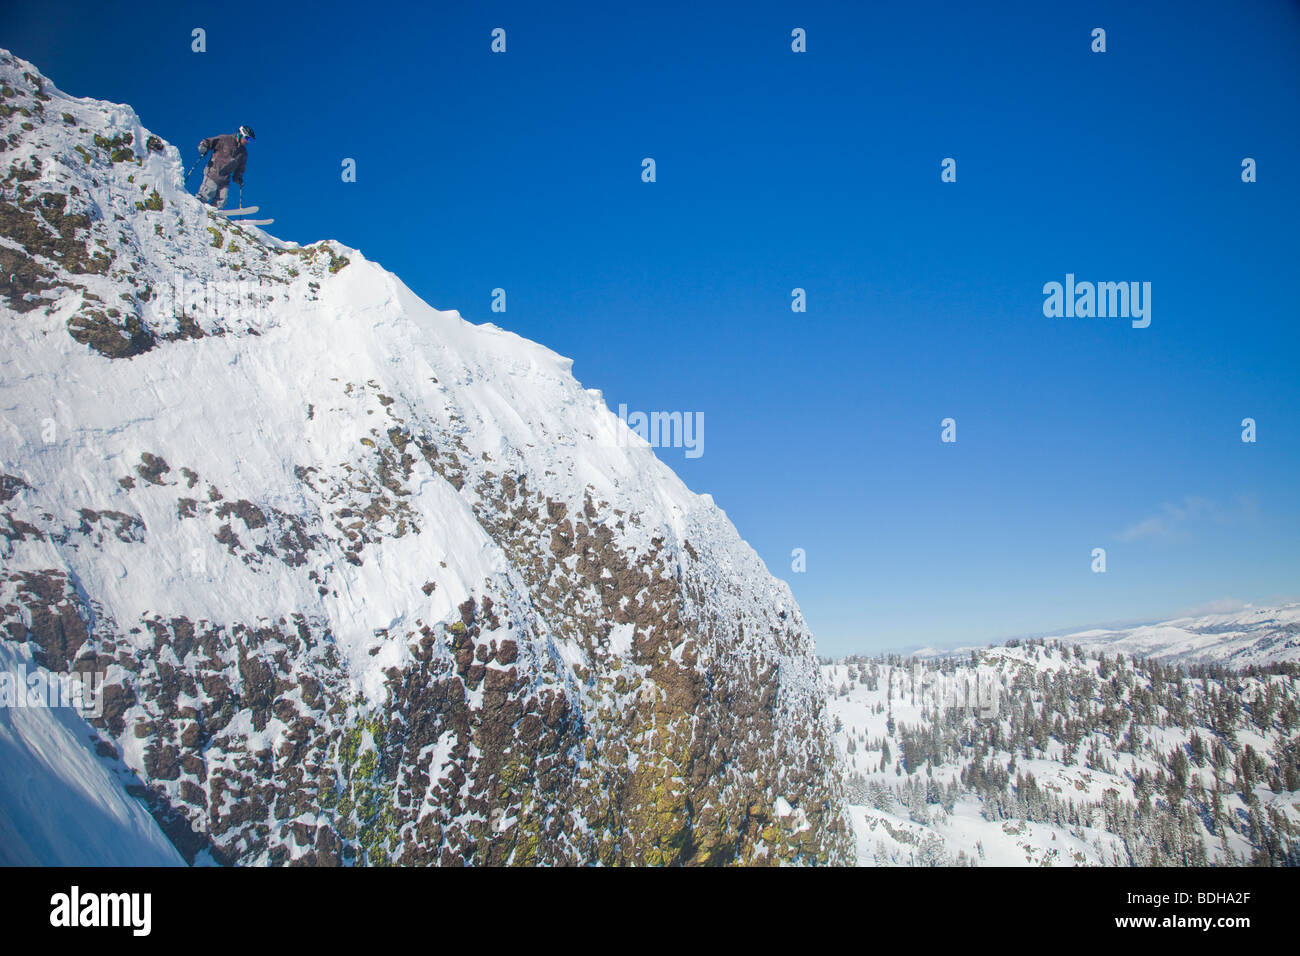 Skier overlooking a steep drop to scout his line before jumping. Stock Photo